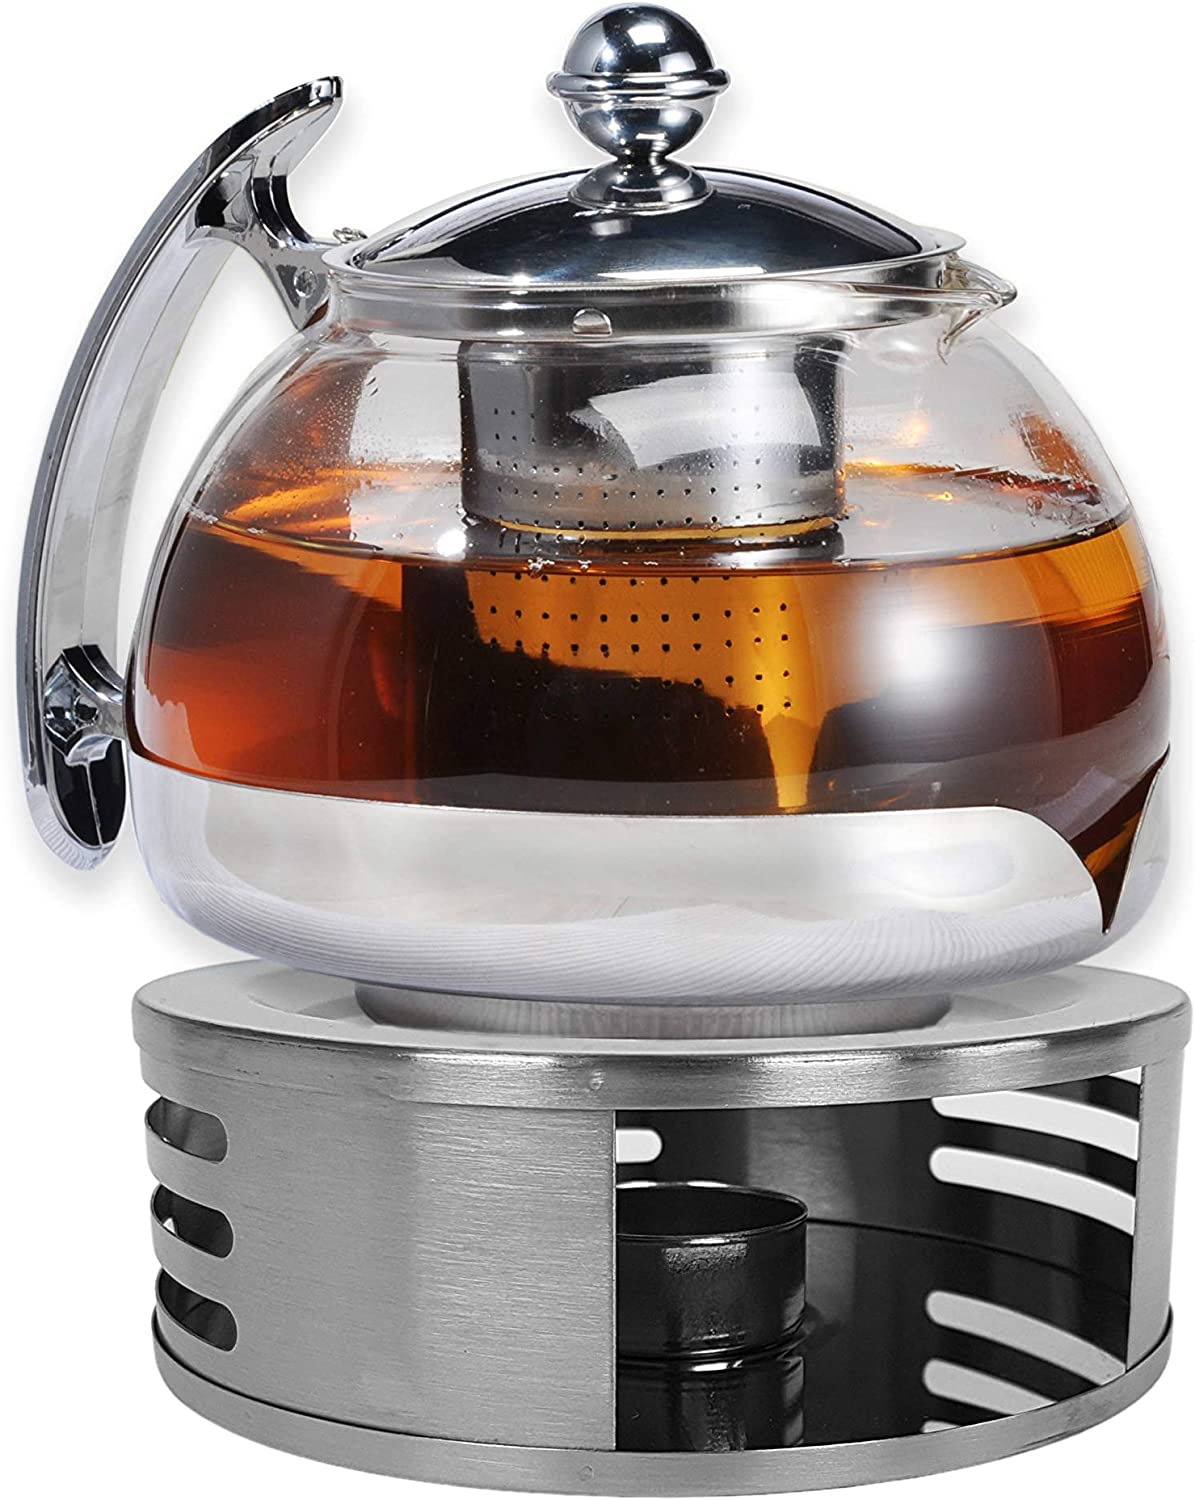 Gravidus Glass Teapot with Strainer Insert and Warmer - 1.2 Litres - Tea Maker & Tea Cosy - Teapot with Warmer - Tea Set